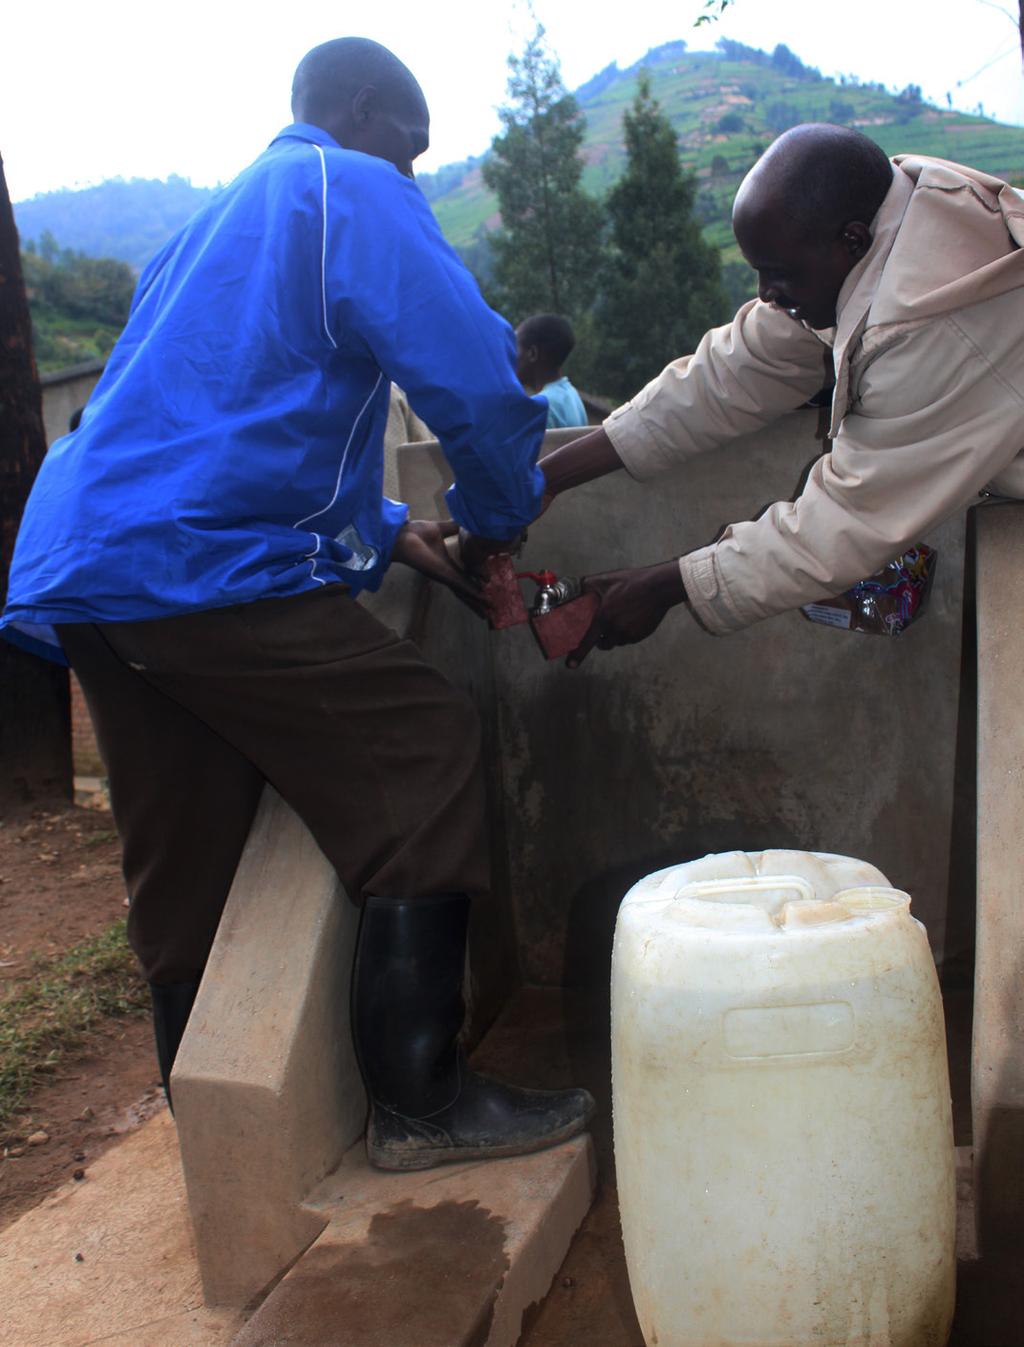 Under the project UNTFHS-Strengthening Human Security by Enhancing Resilience to Natural Disasters and Climate-Related Threats in Ngororero District they received potable water facilities.